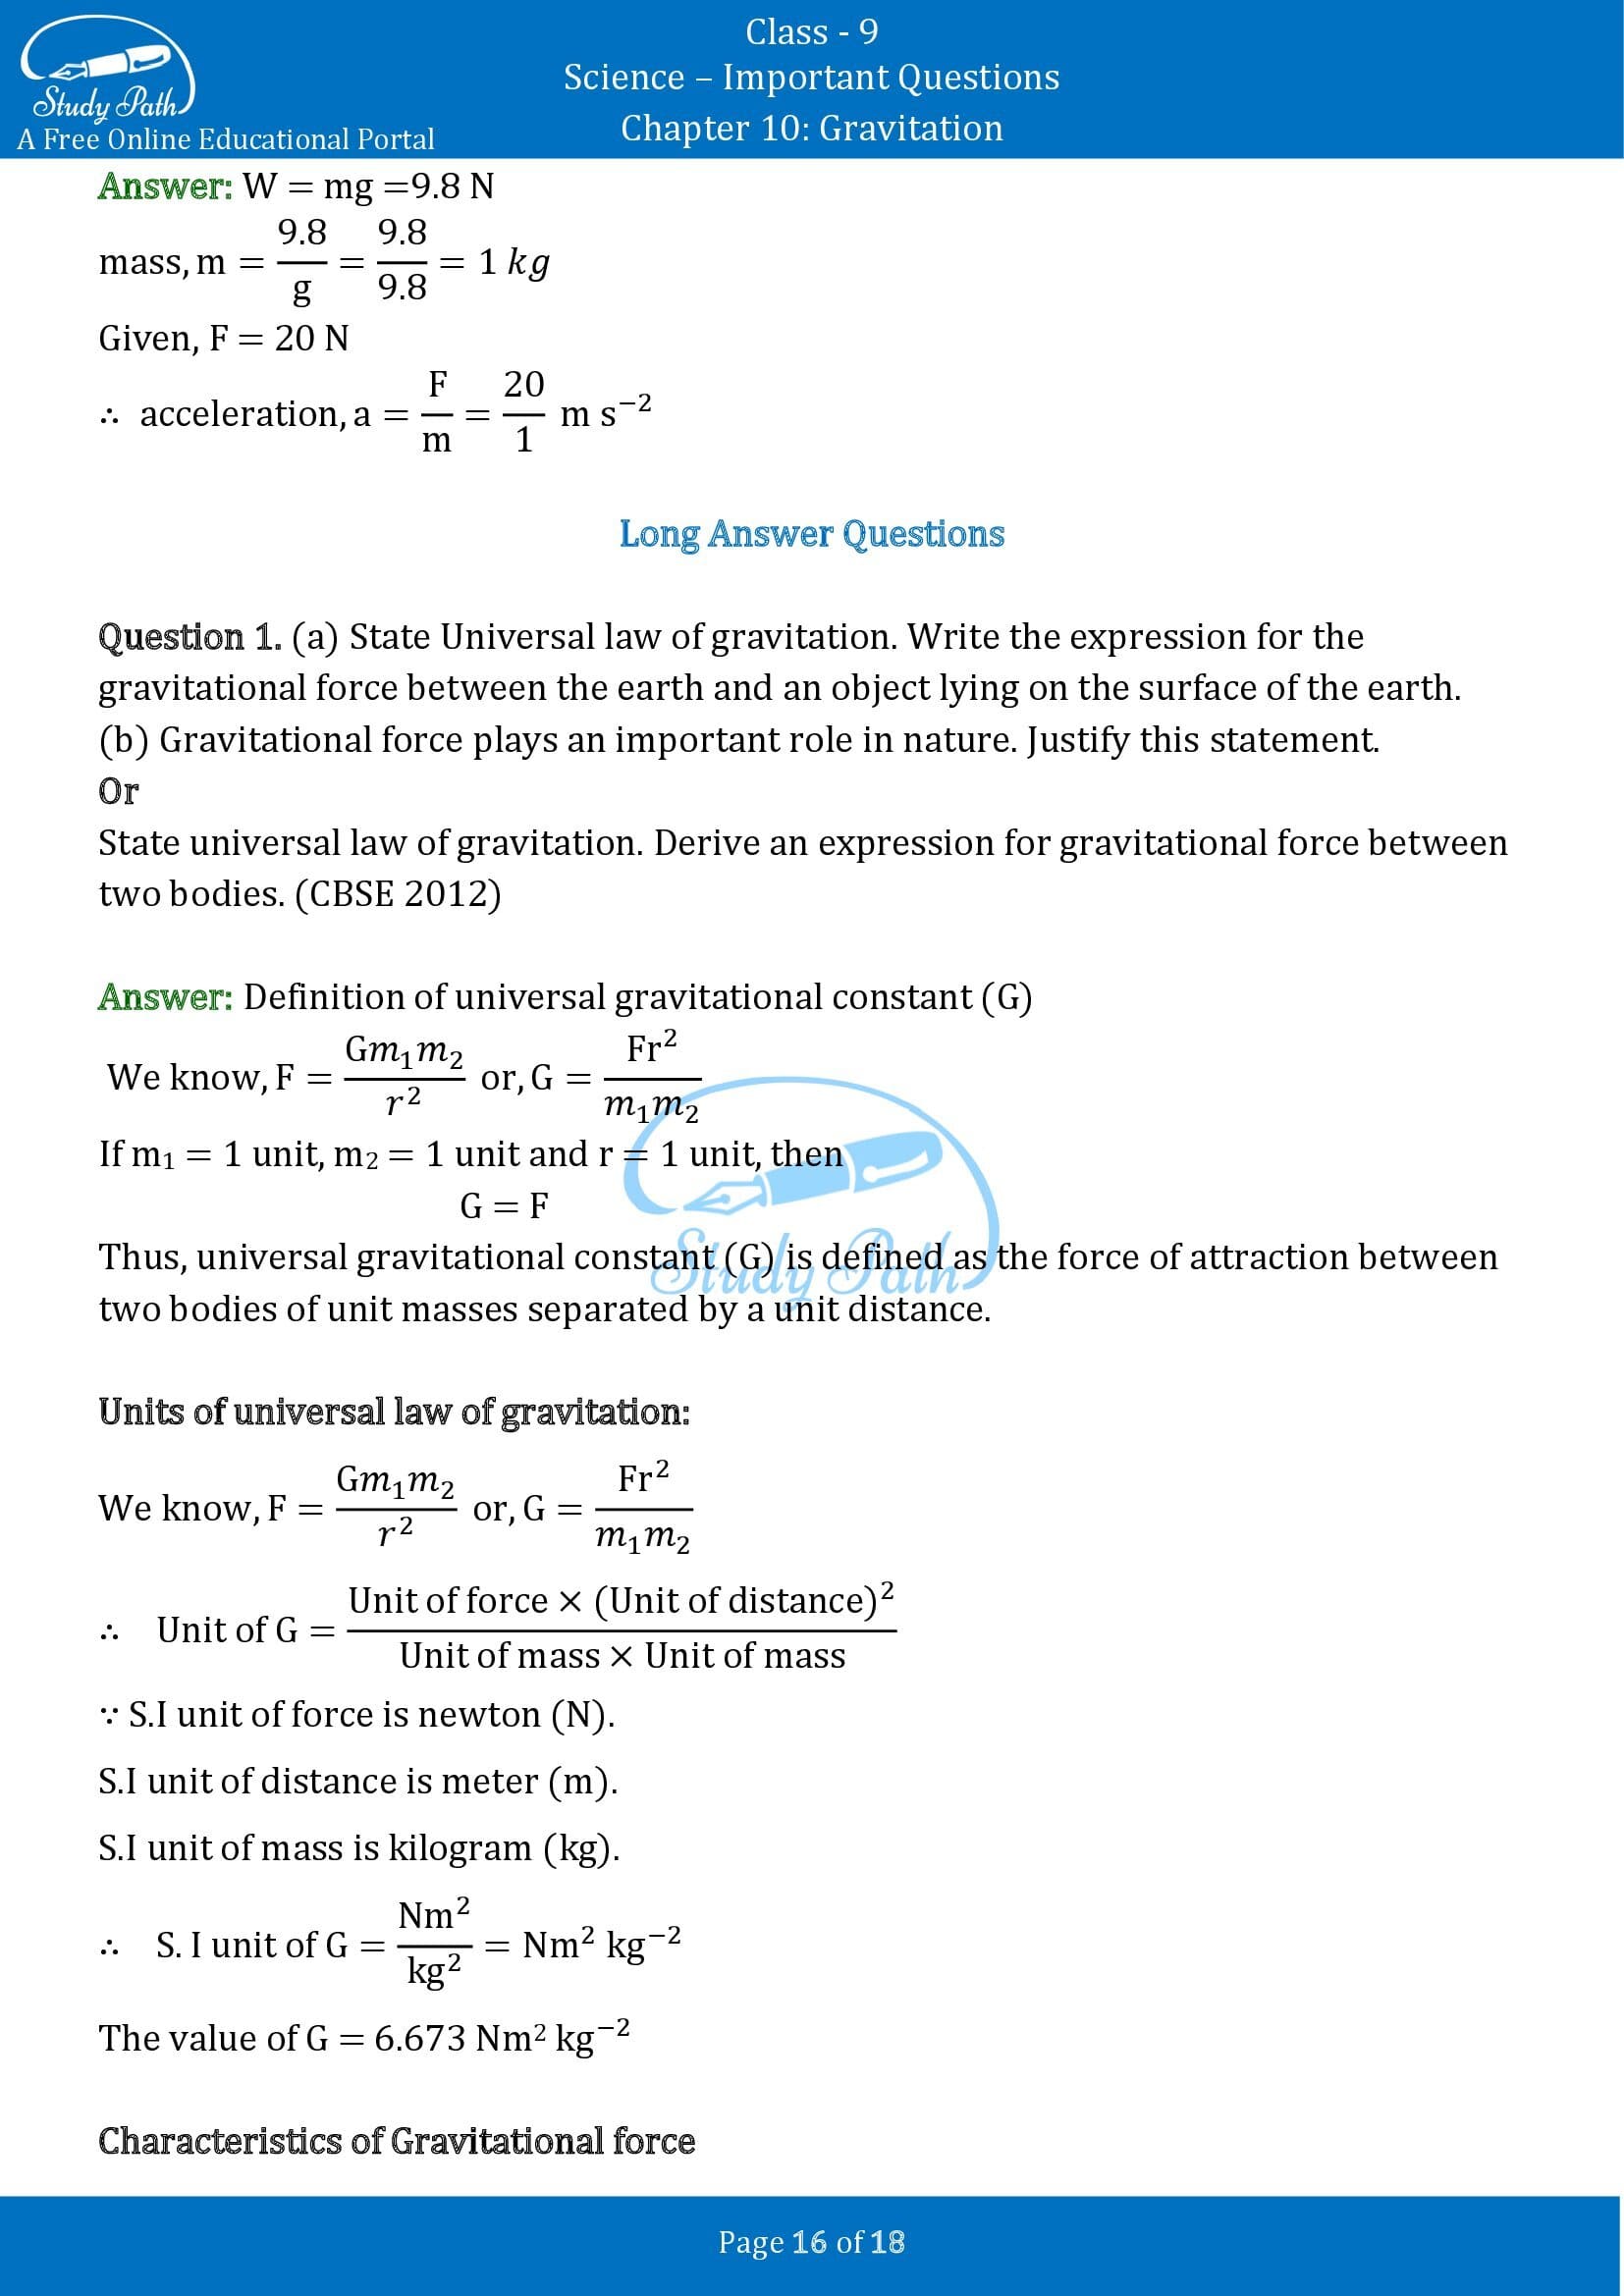 Important Questions for Class 9 Science Chapter 10 Gravitation 00016